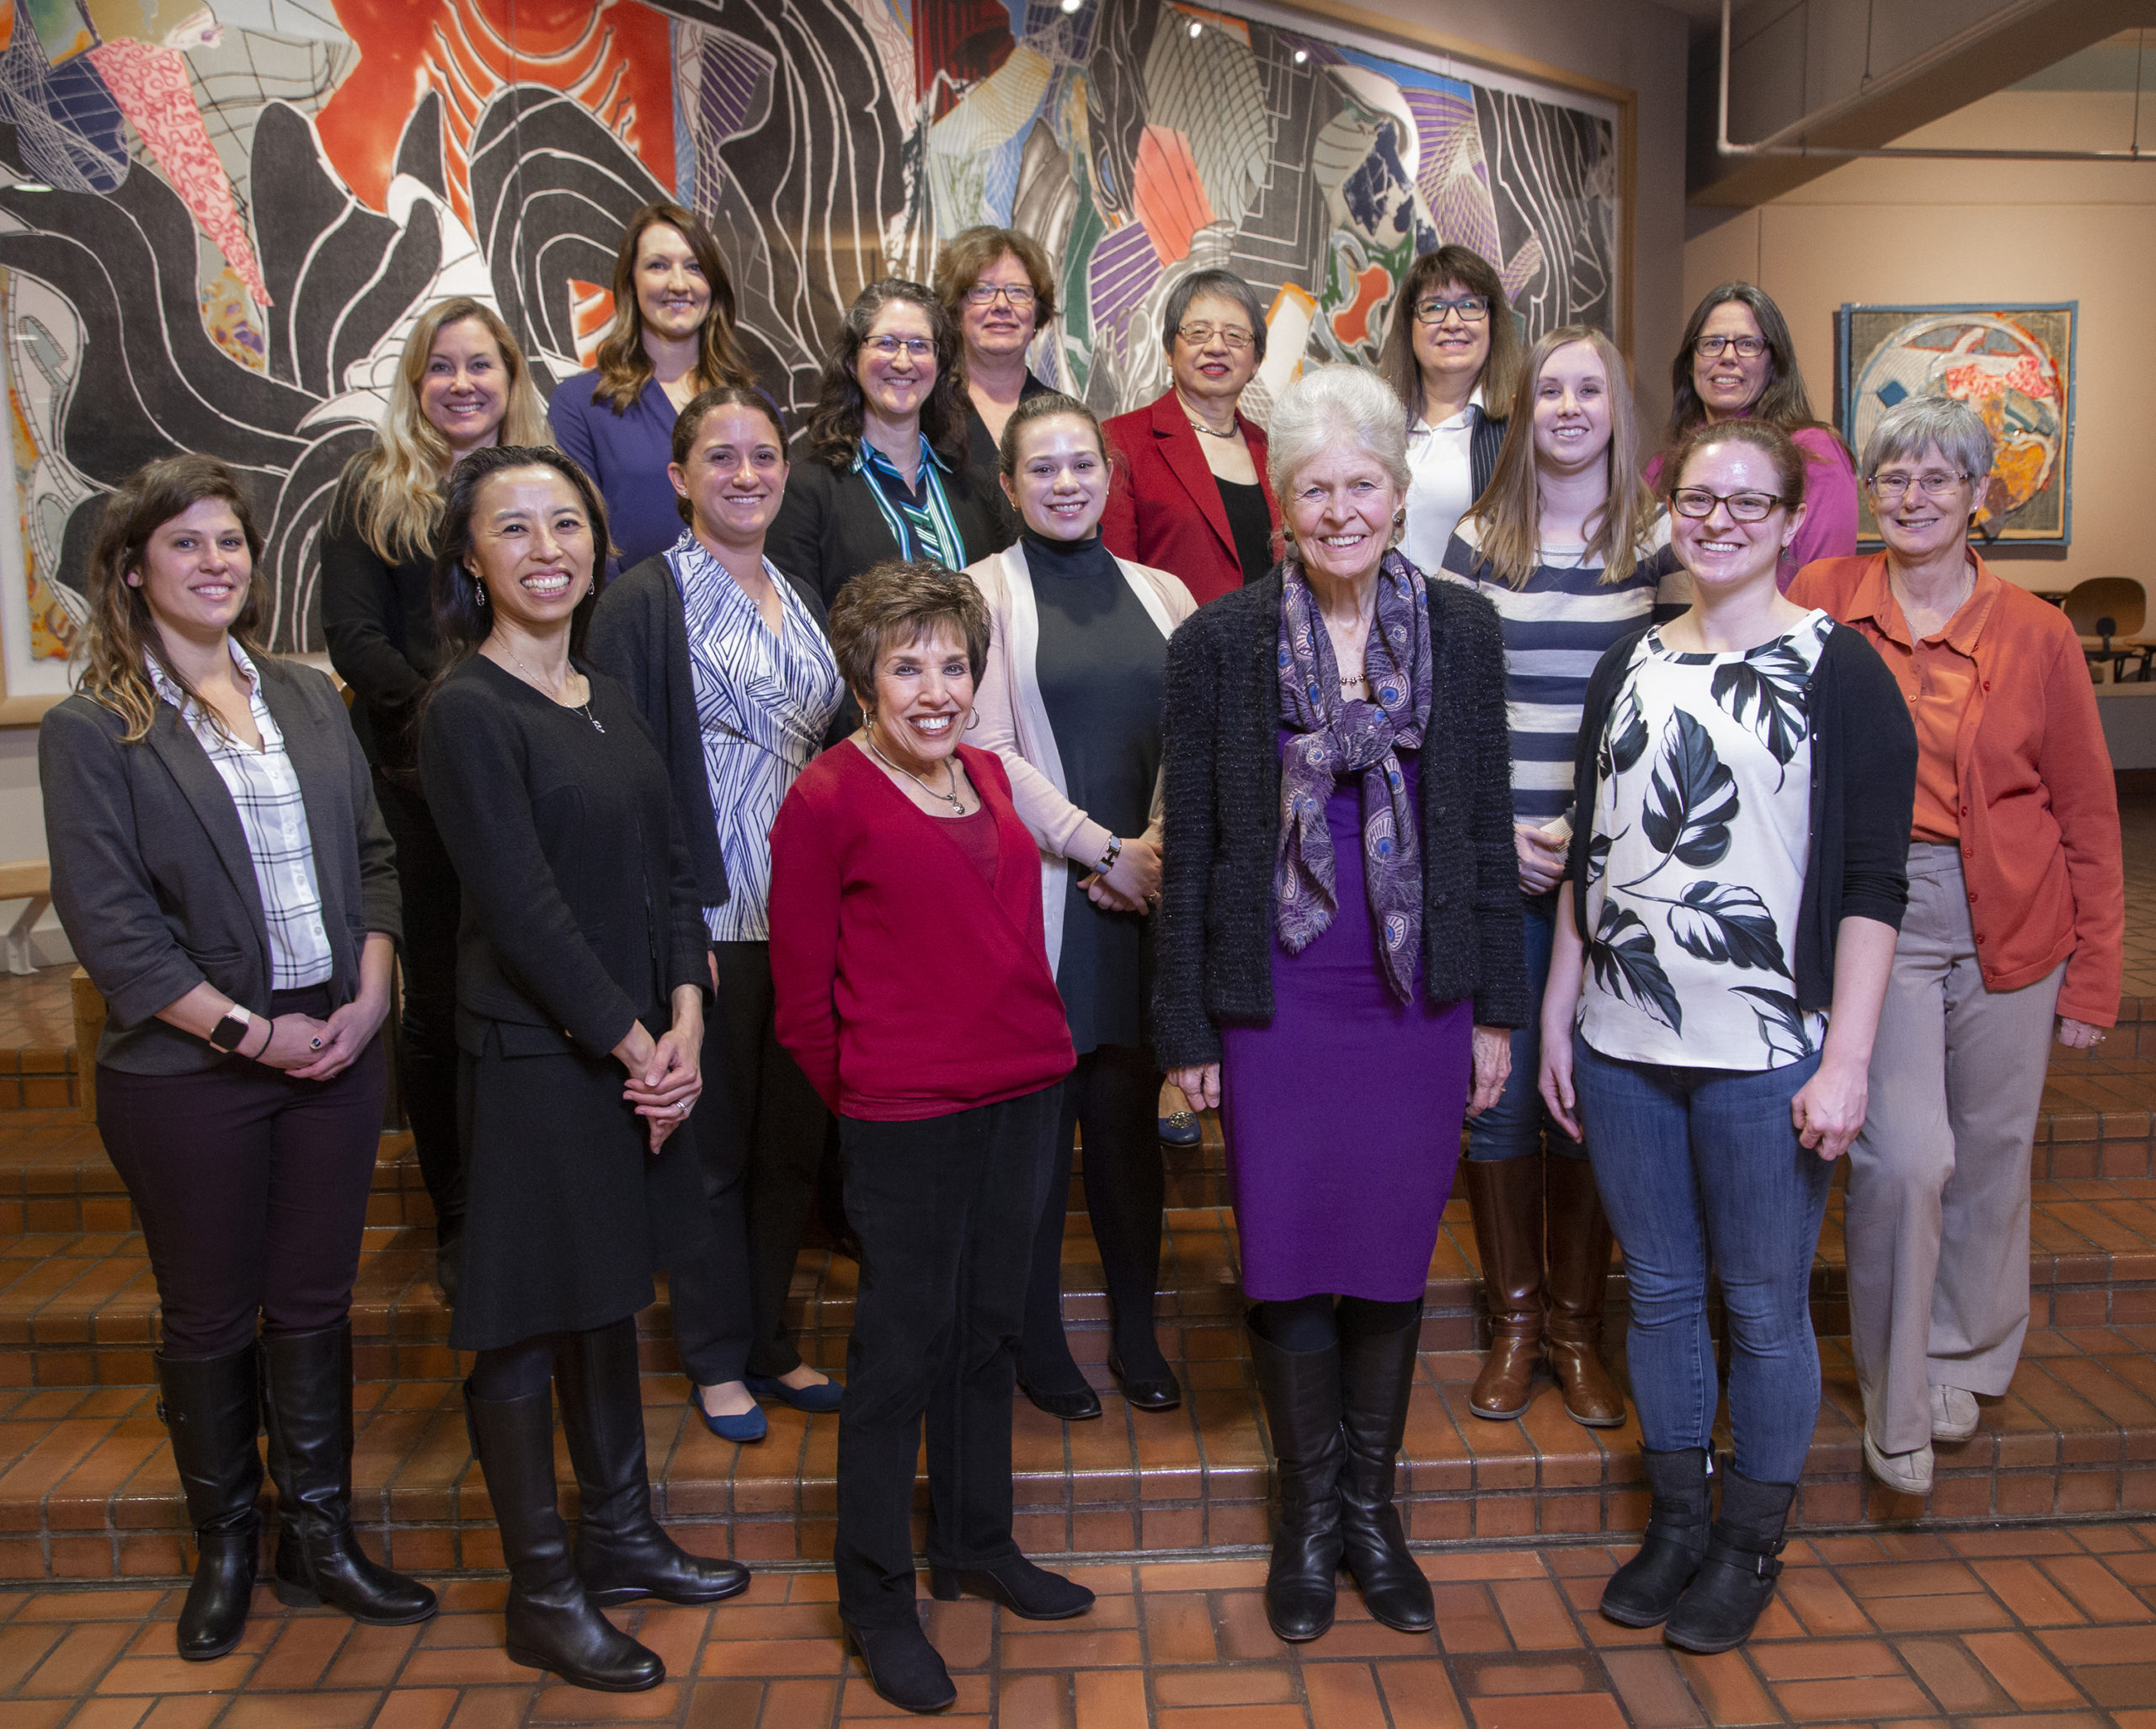 Members of the Women in Science and Medicine Advisory Committee - WISMAC - posing for a picture.